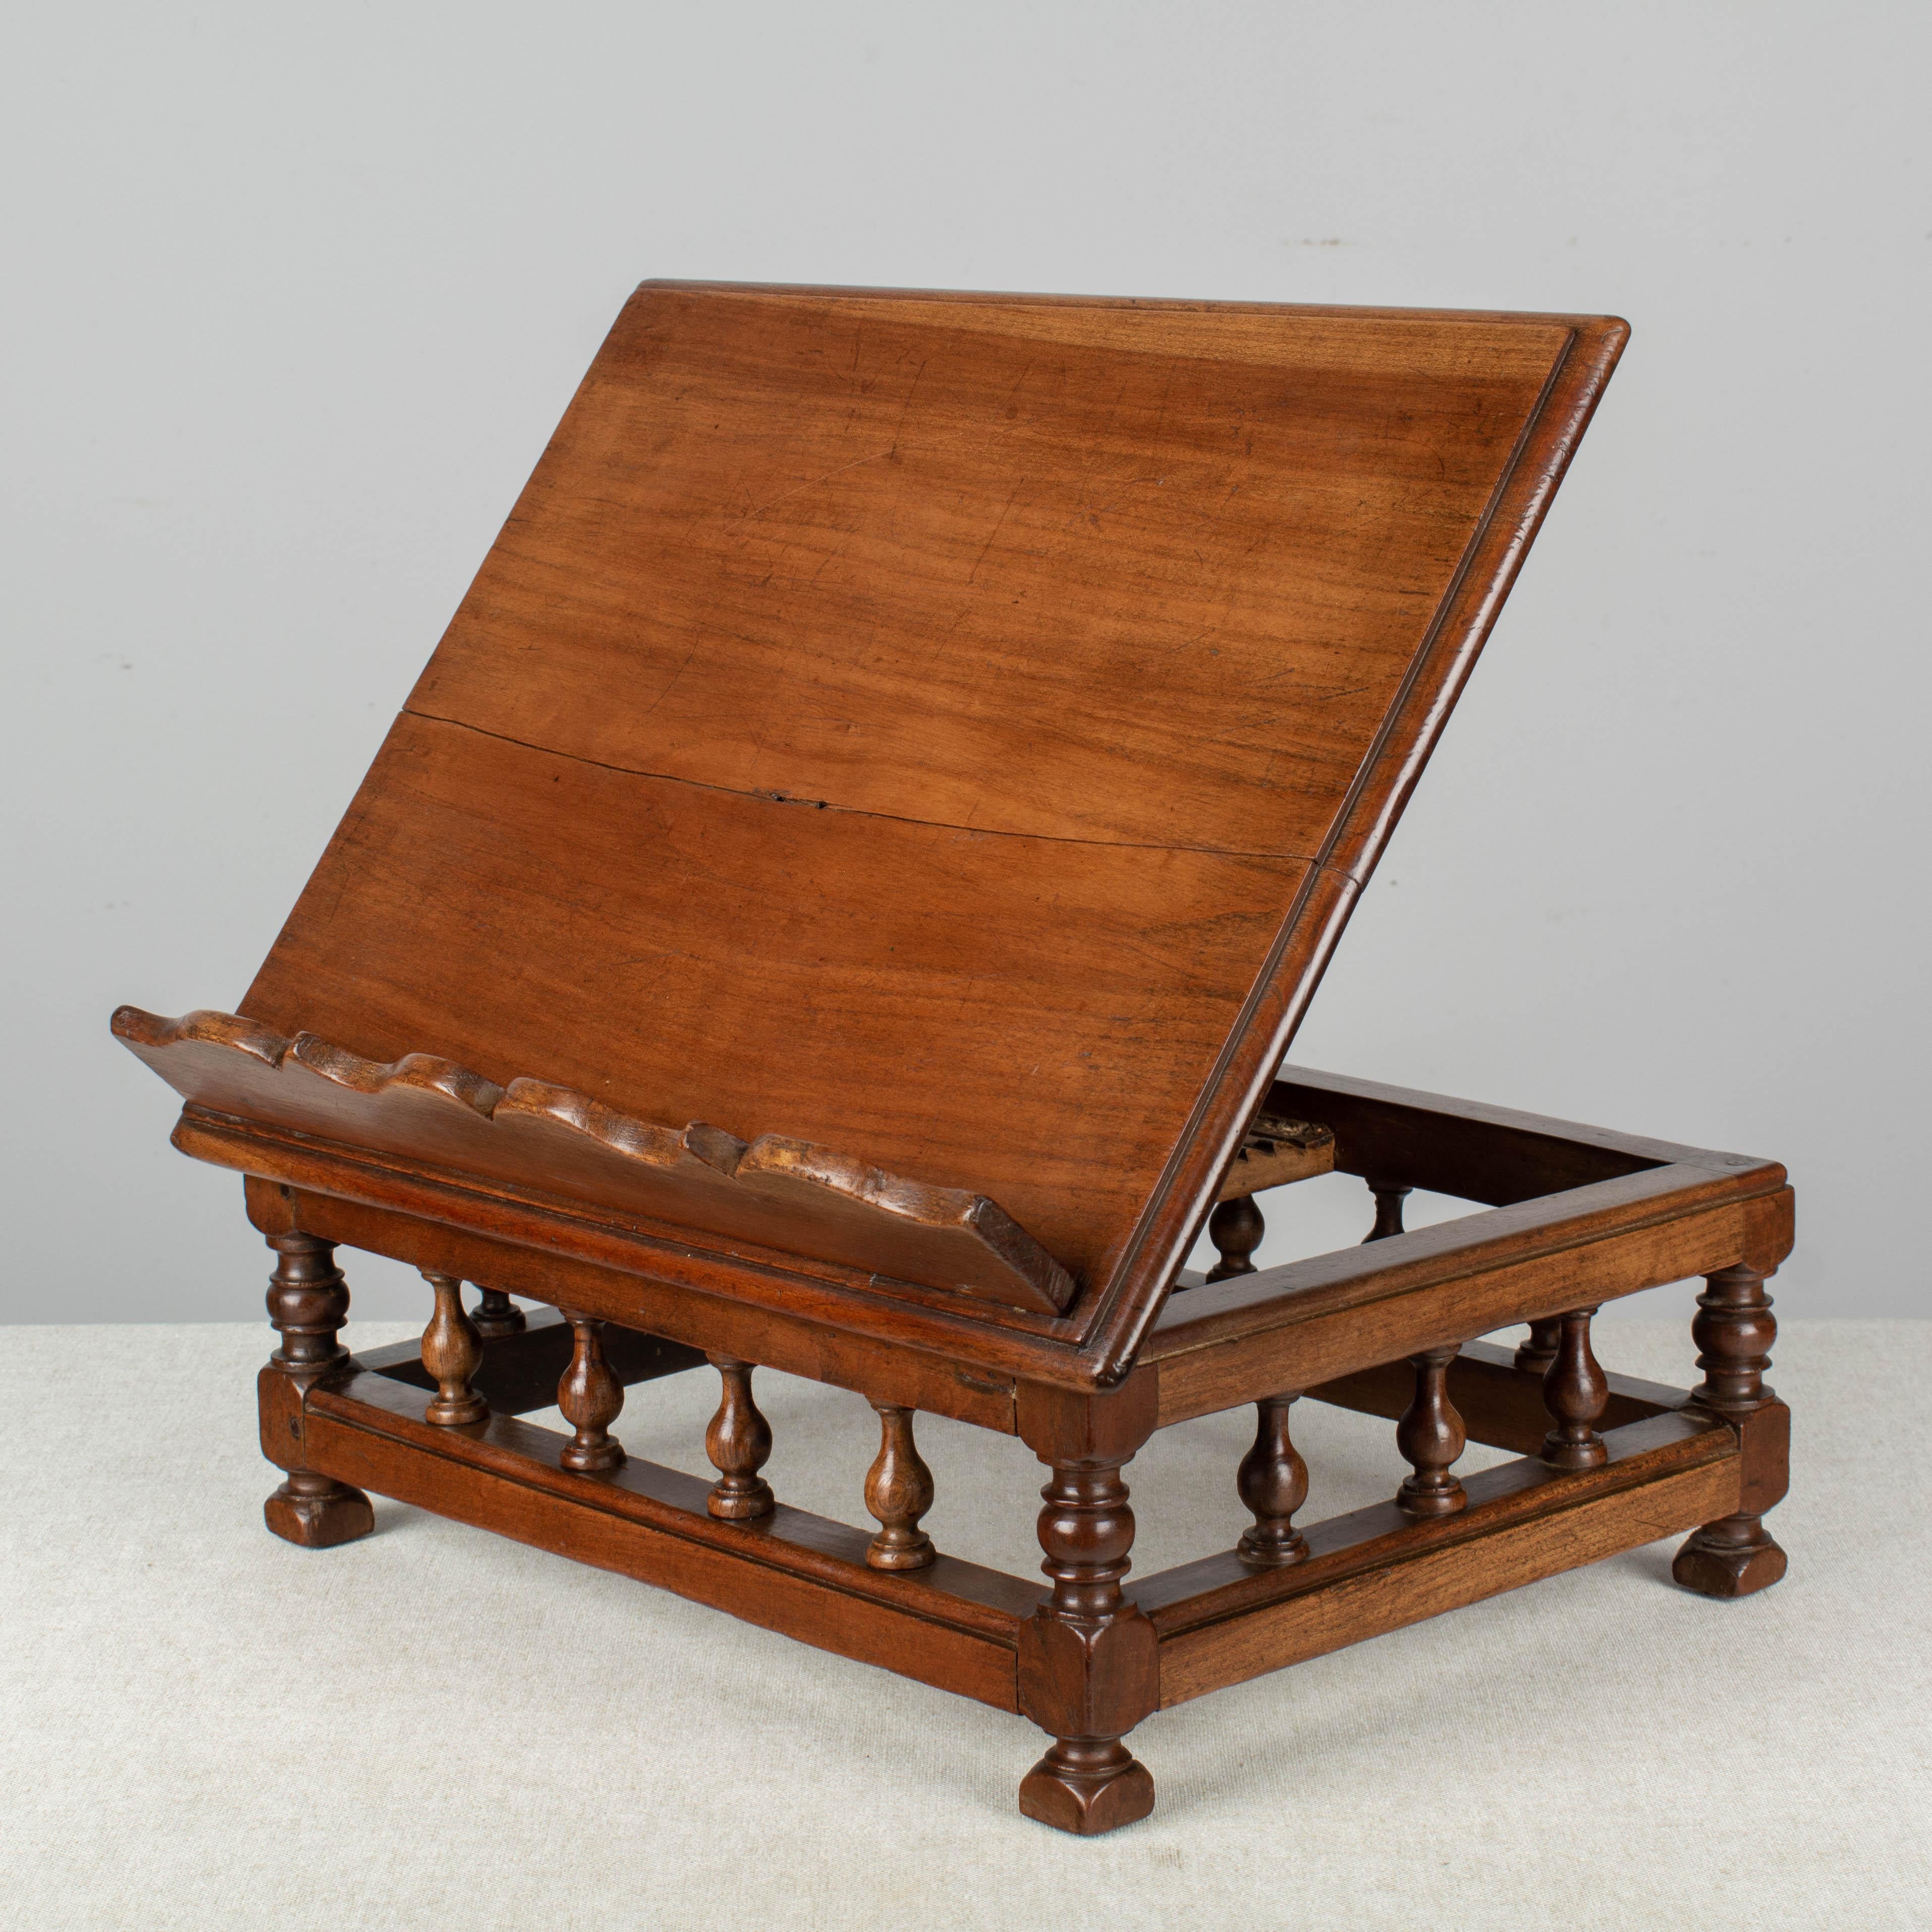 A 19th century French tabletop book stand with adjustable easel and scalloped ledge made of cherry and walnut. An iron hinge on the back and multiple notches allows the plank to be propped to a variety of angles. Sturdy base decorated with turned